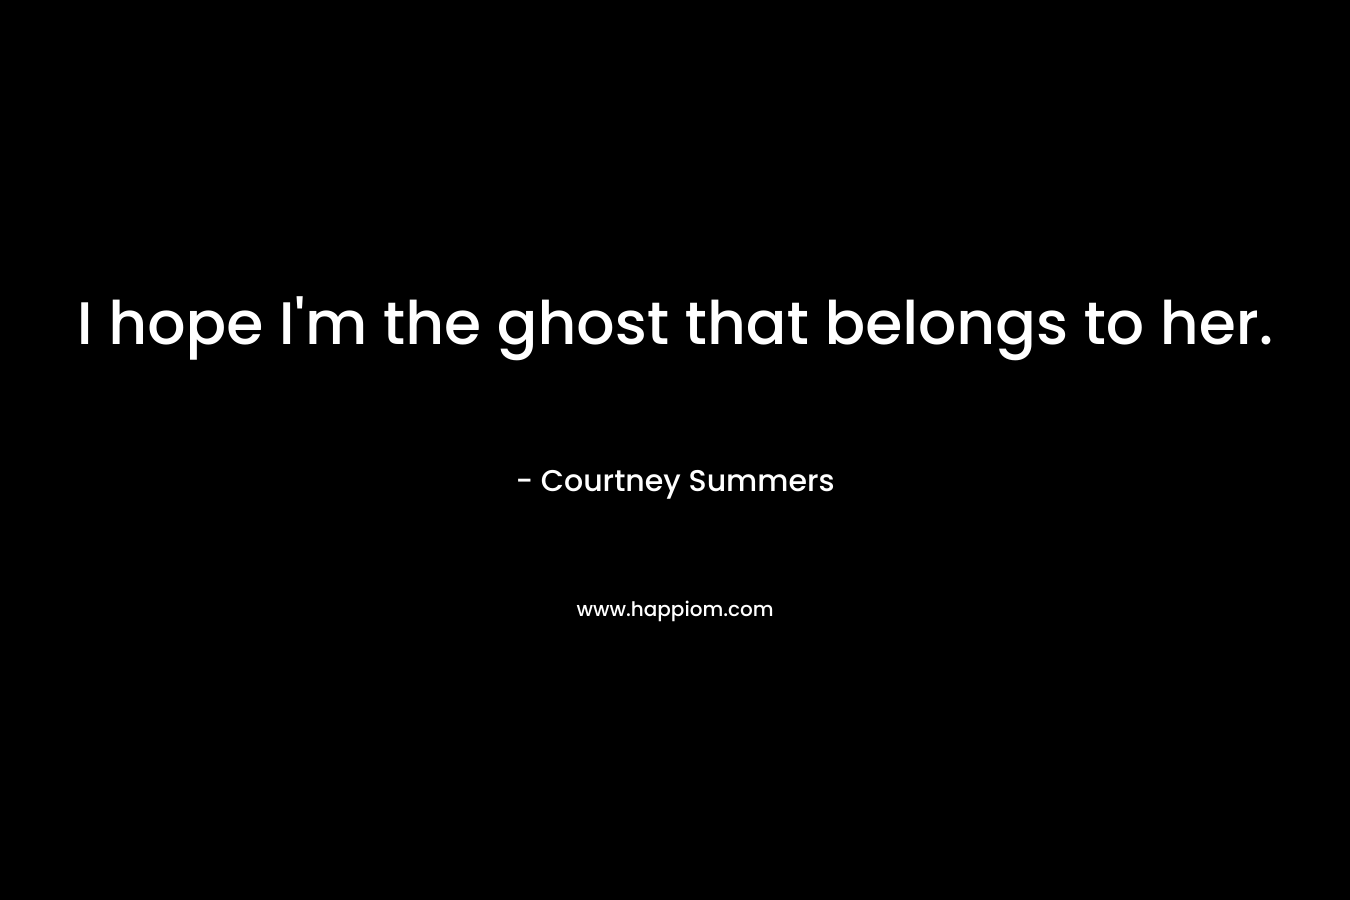 I hope I’m the ghost that belongs to her. – Courtney Summers